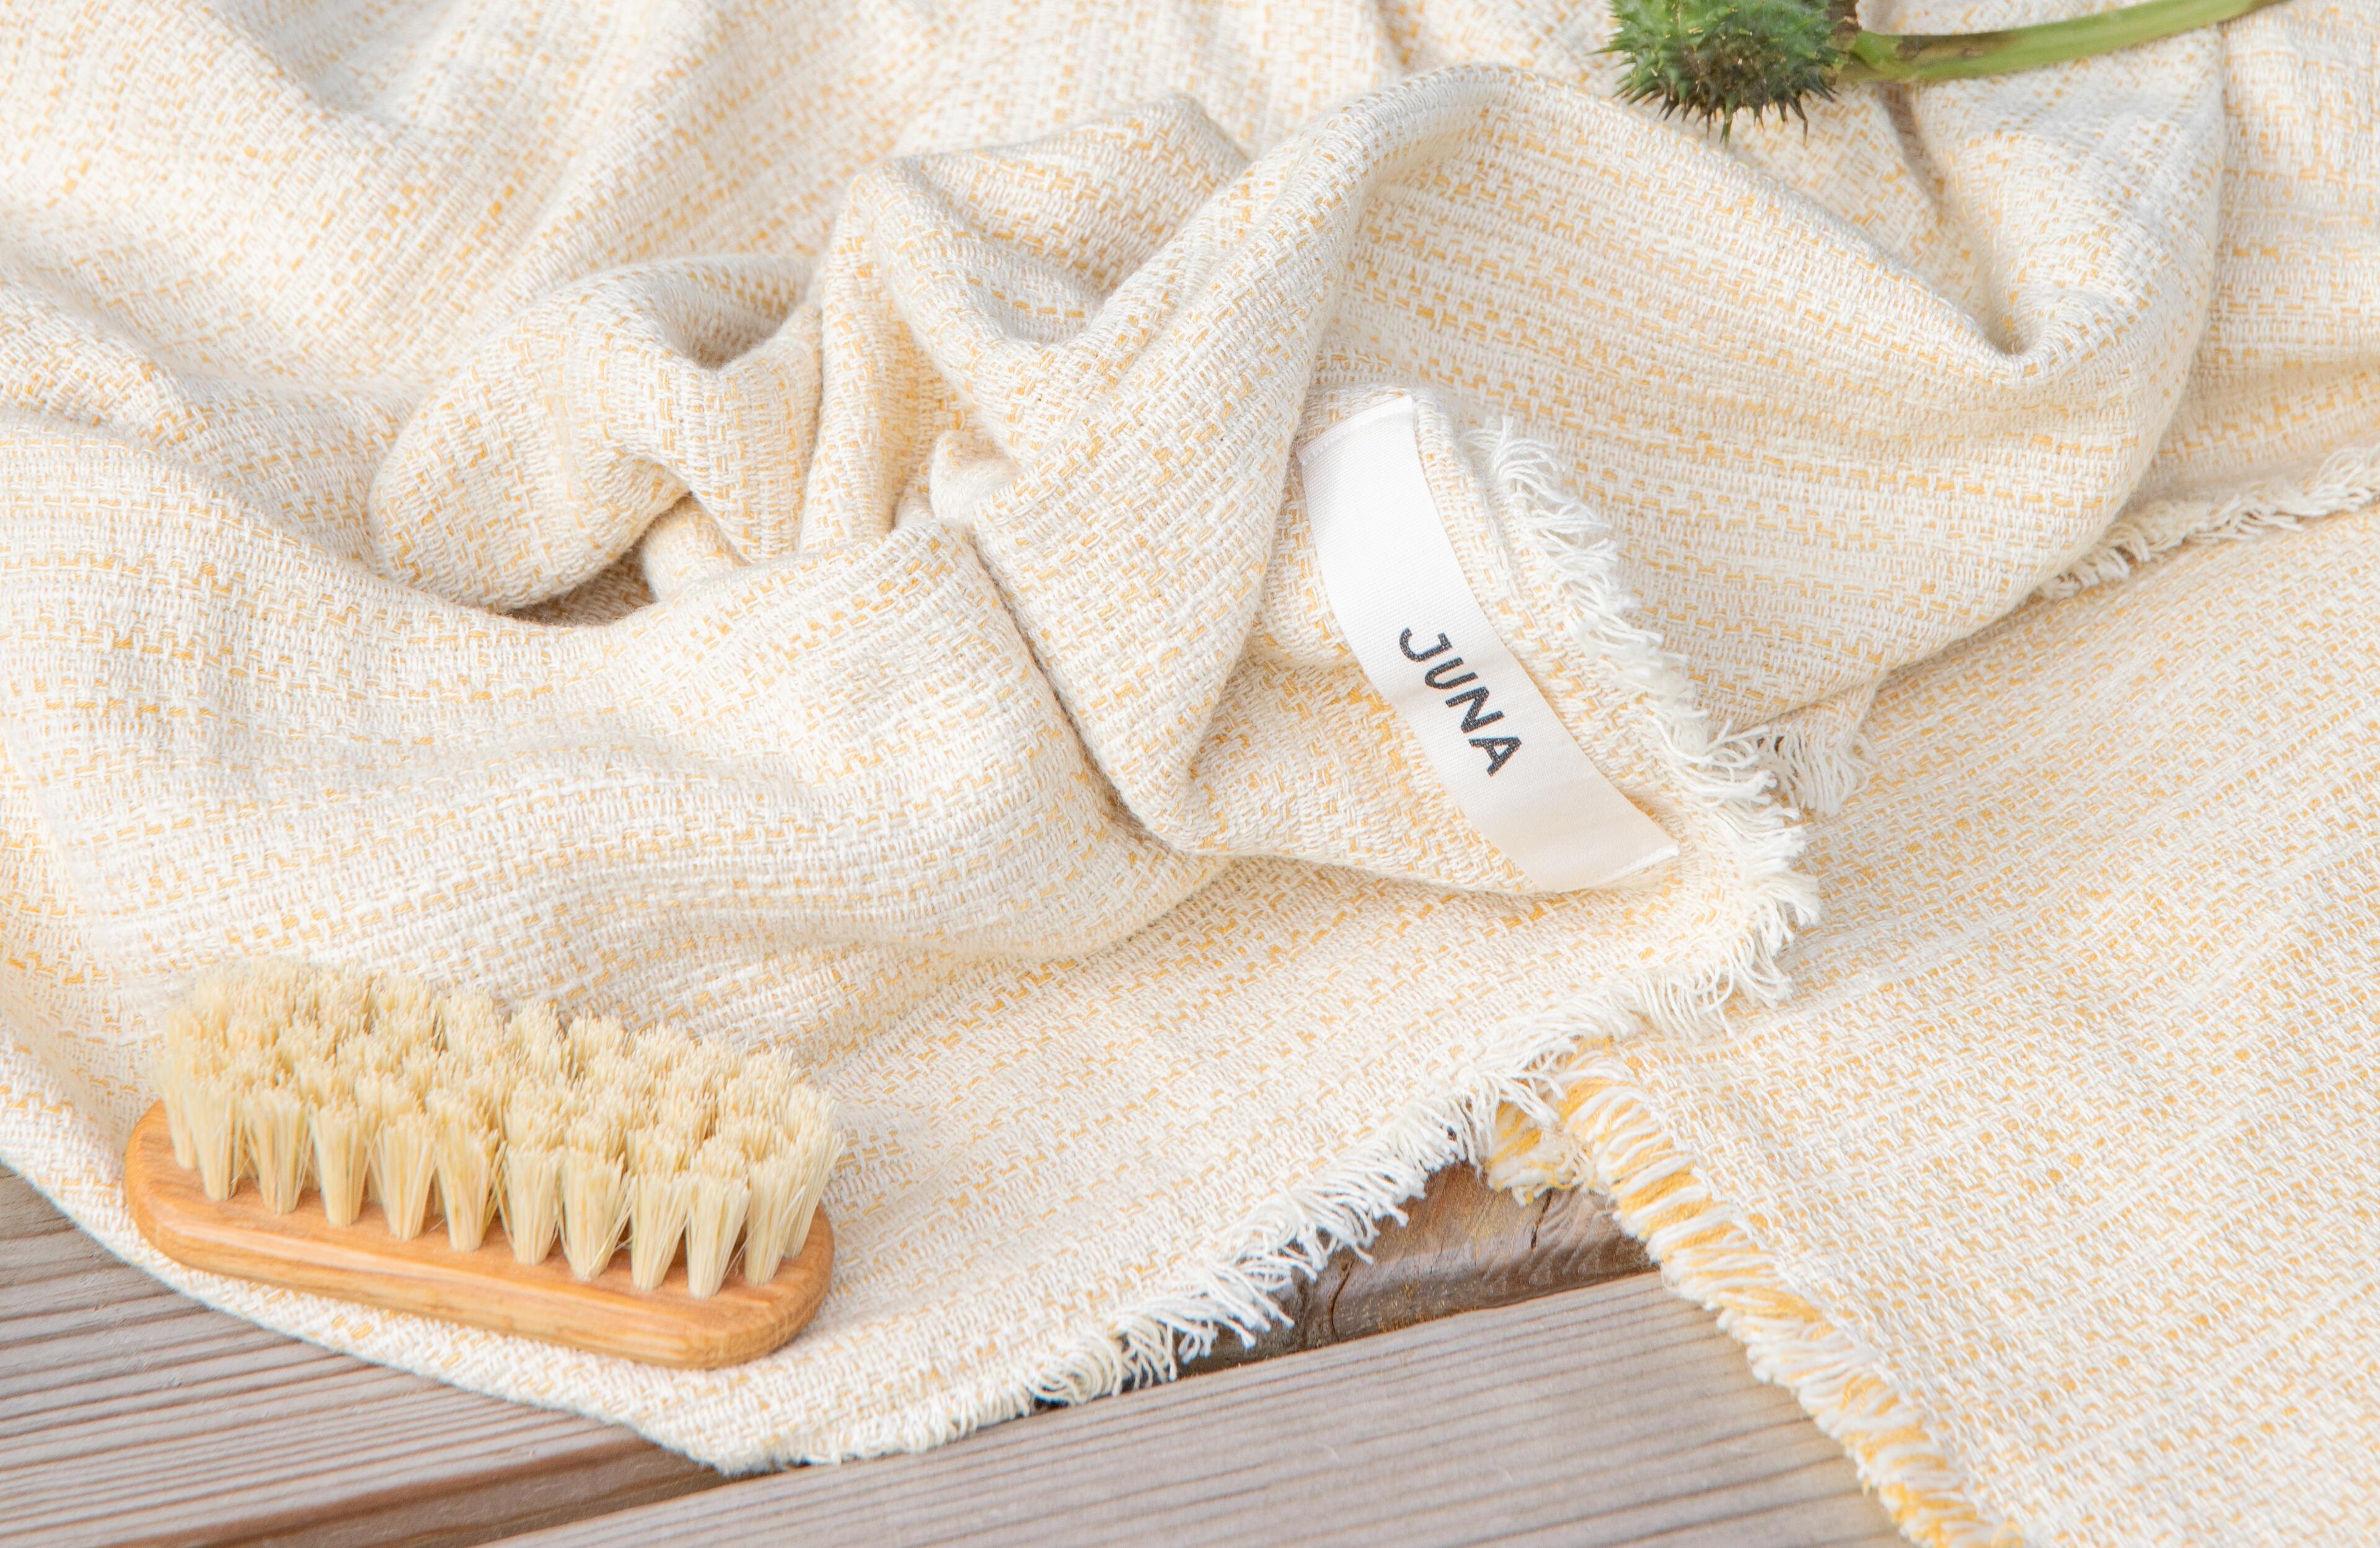 Towels from JUNA. Bright yellow towel for beach and home